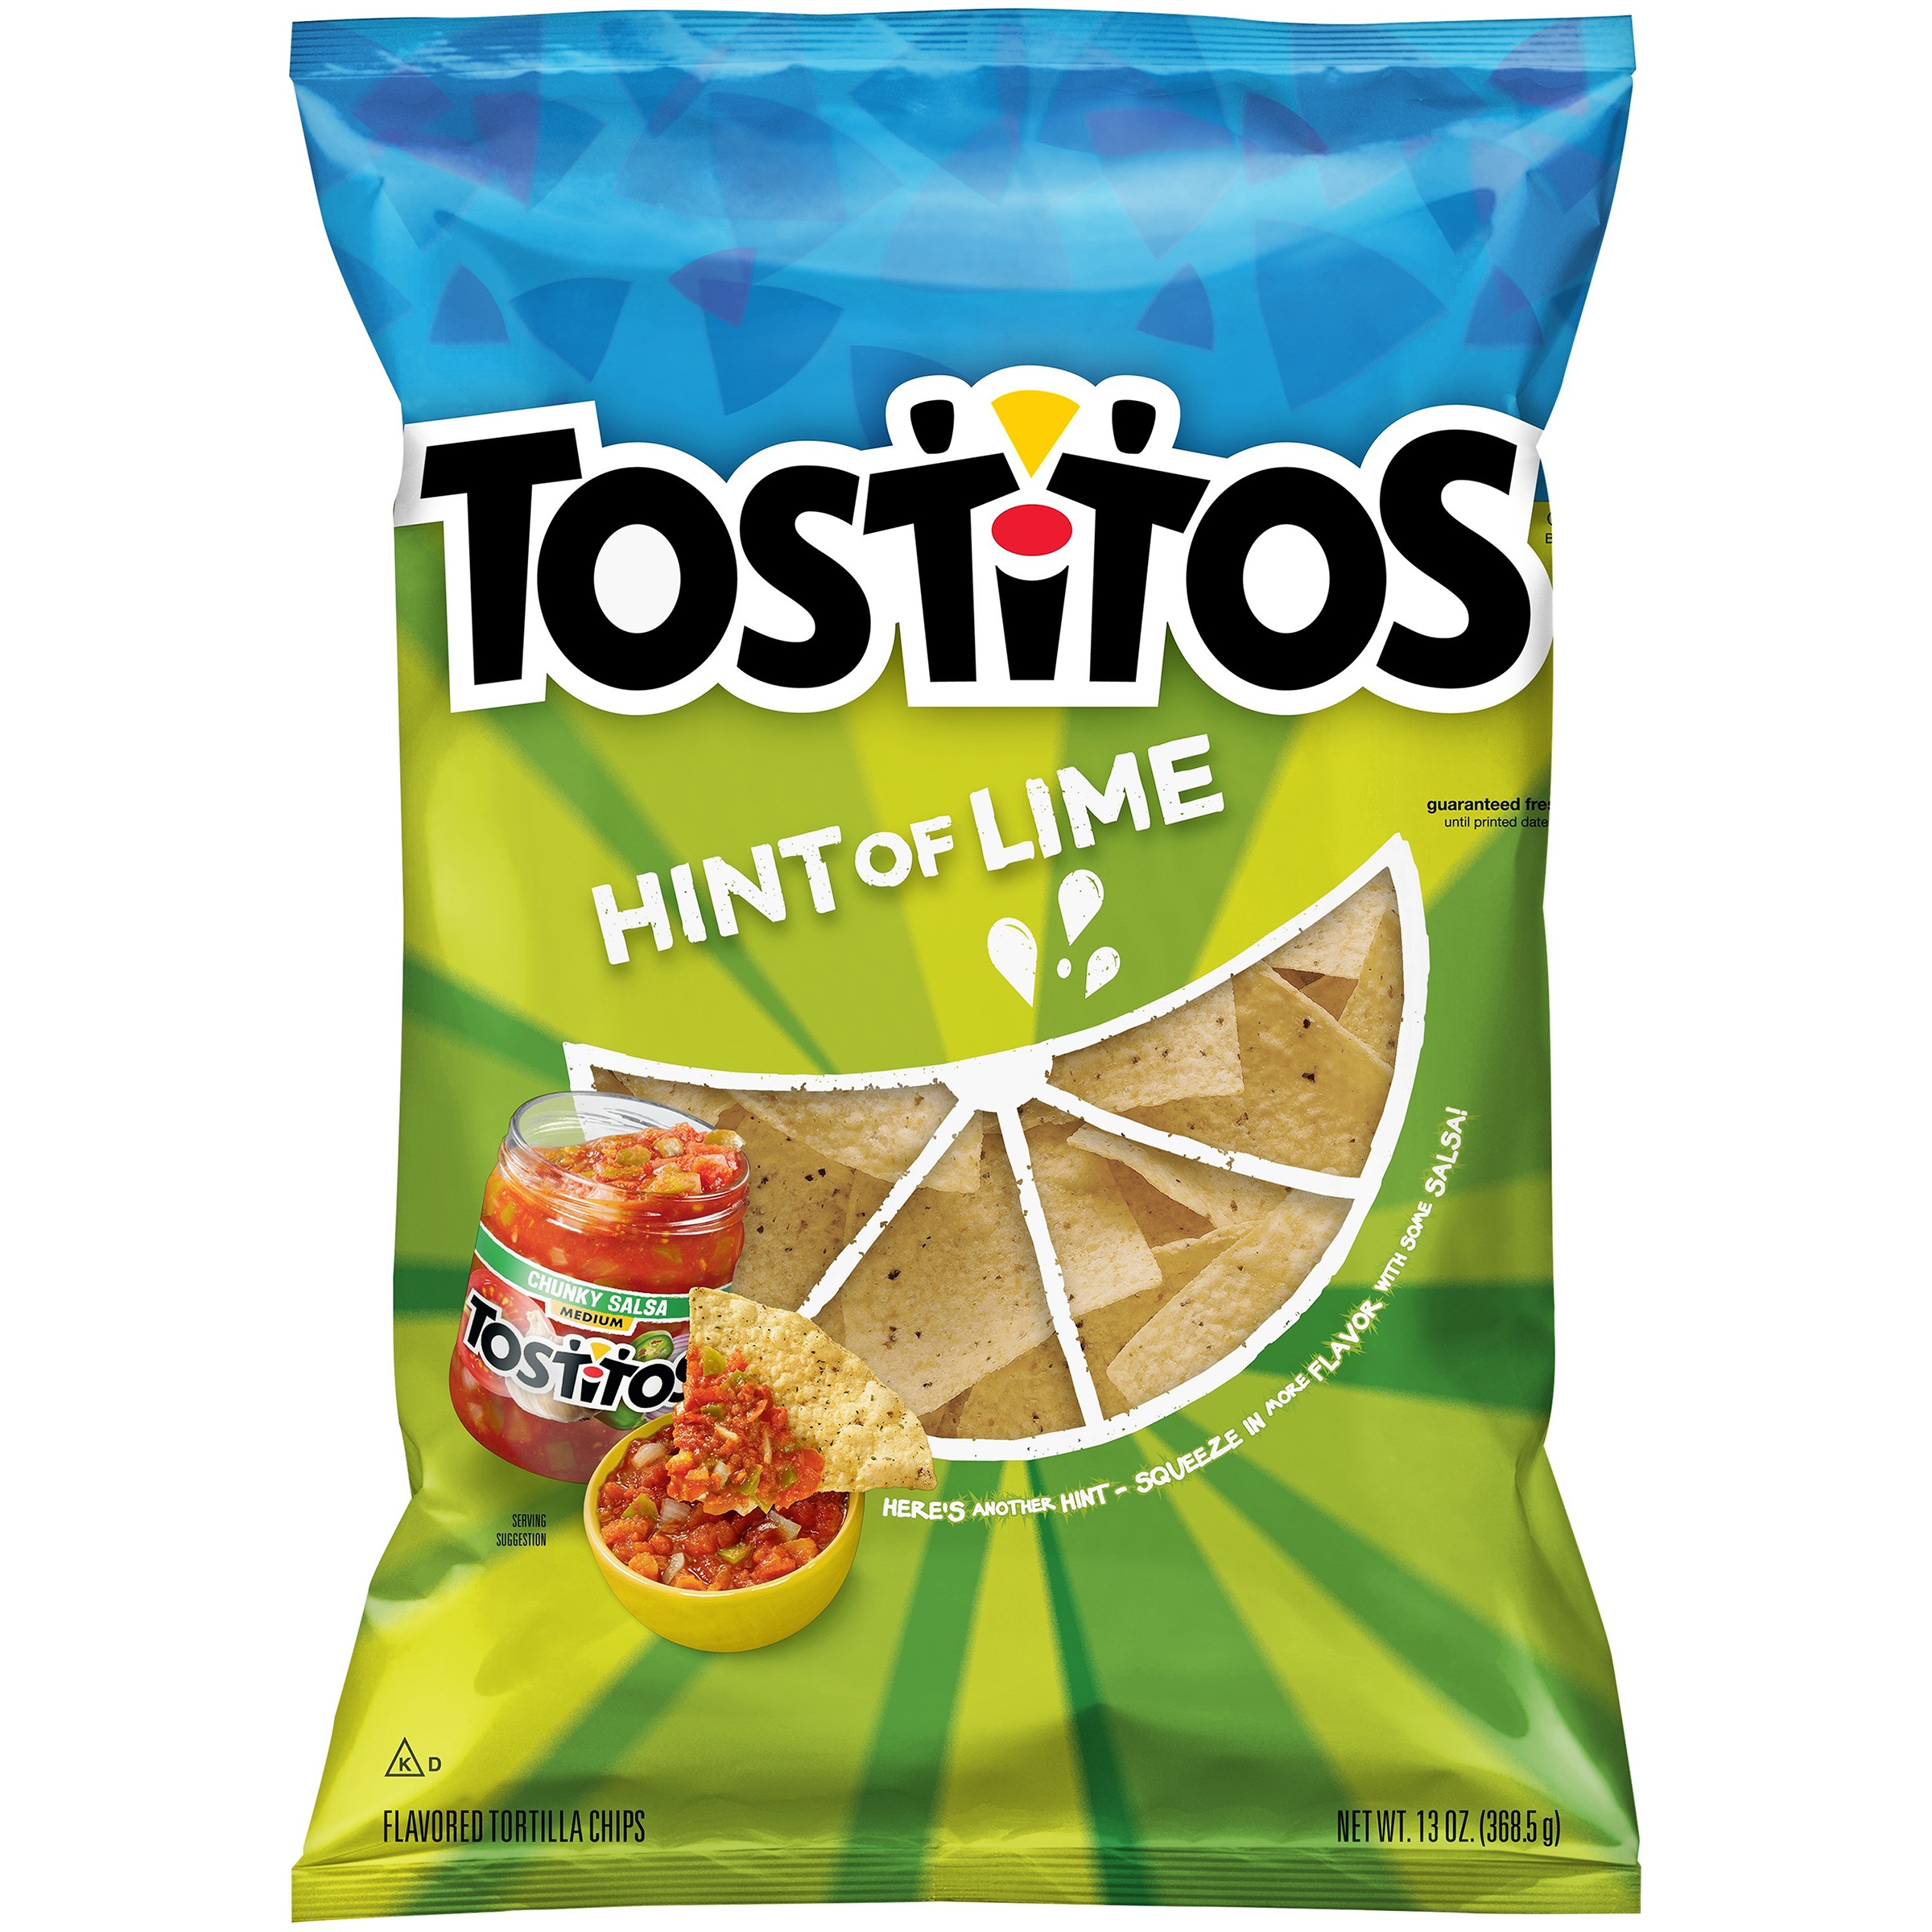 Tostitos Hint of Lime Flavored Tortilla Chips, 13 oz Bag - image 1 of 5